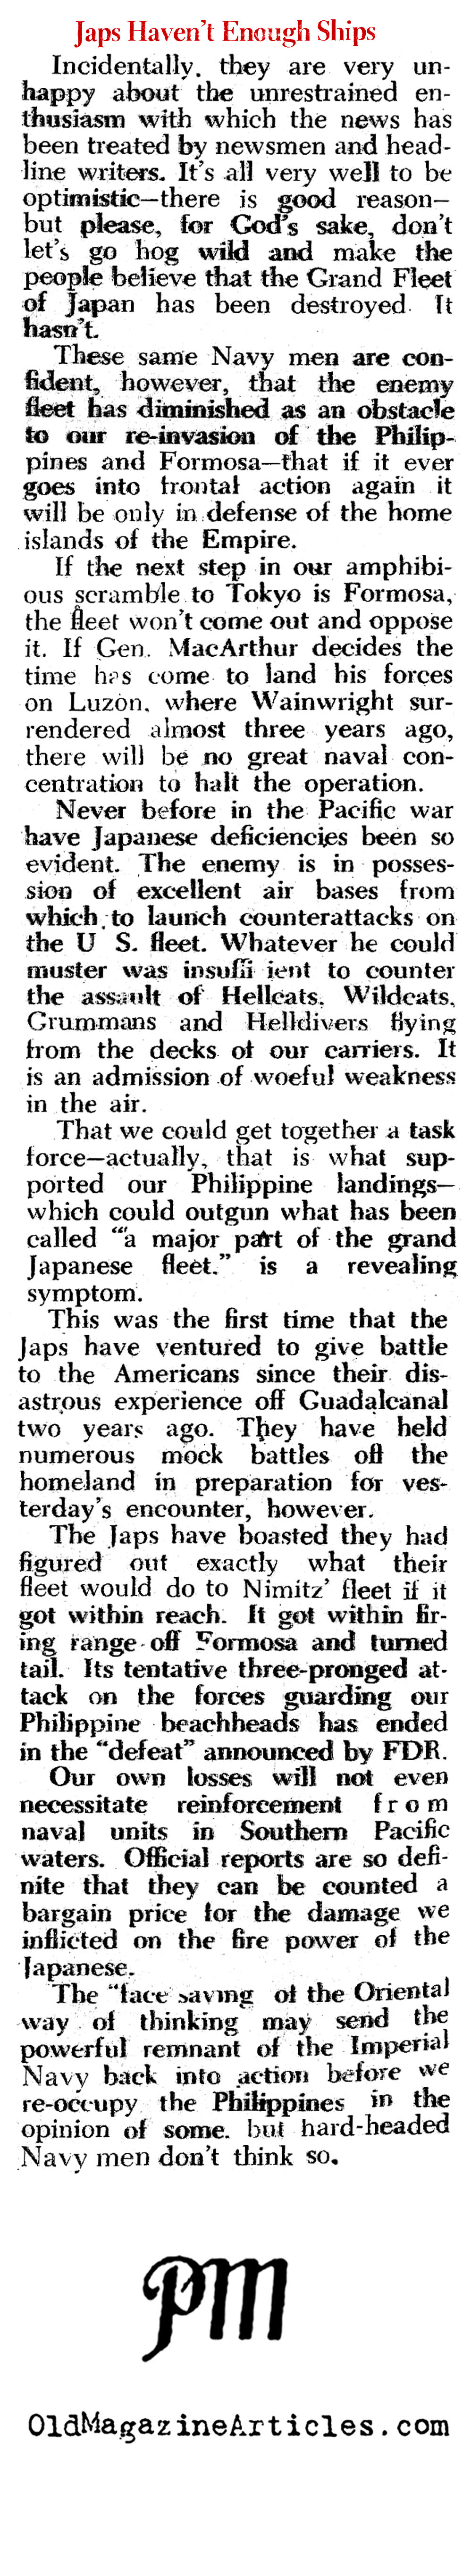 The Japanese Run Out of Ships (PM Tabloid, 1944)